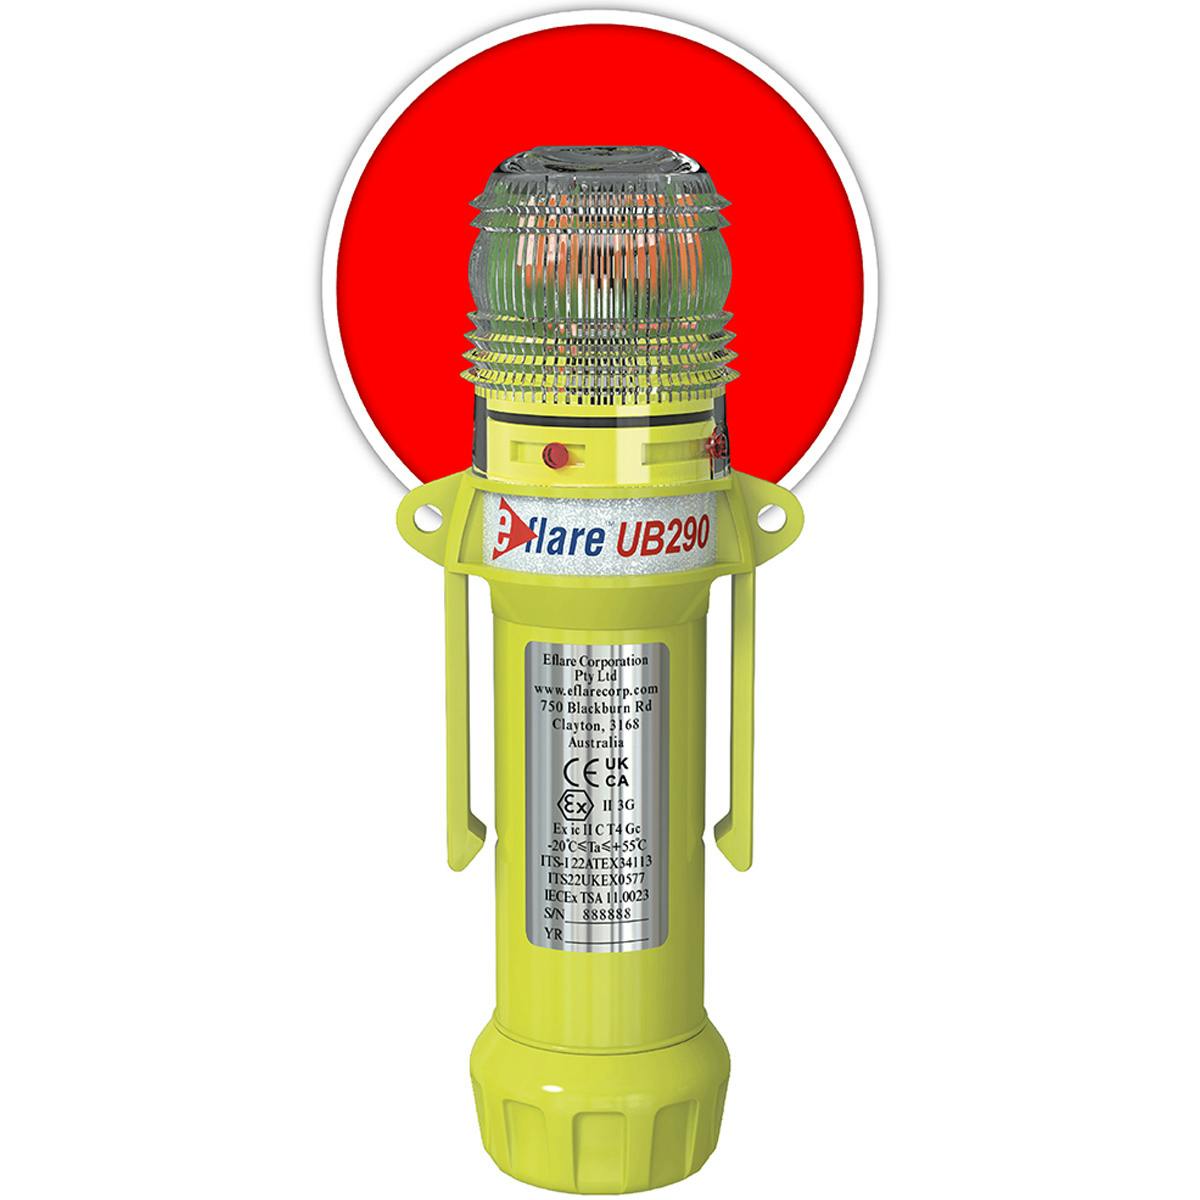 8" Safety & Emergency Beacon - Flashing / Steady-On Red, Red (939-UB290-R) - 8